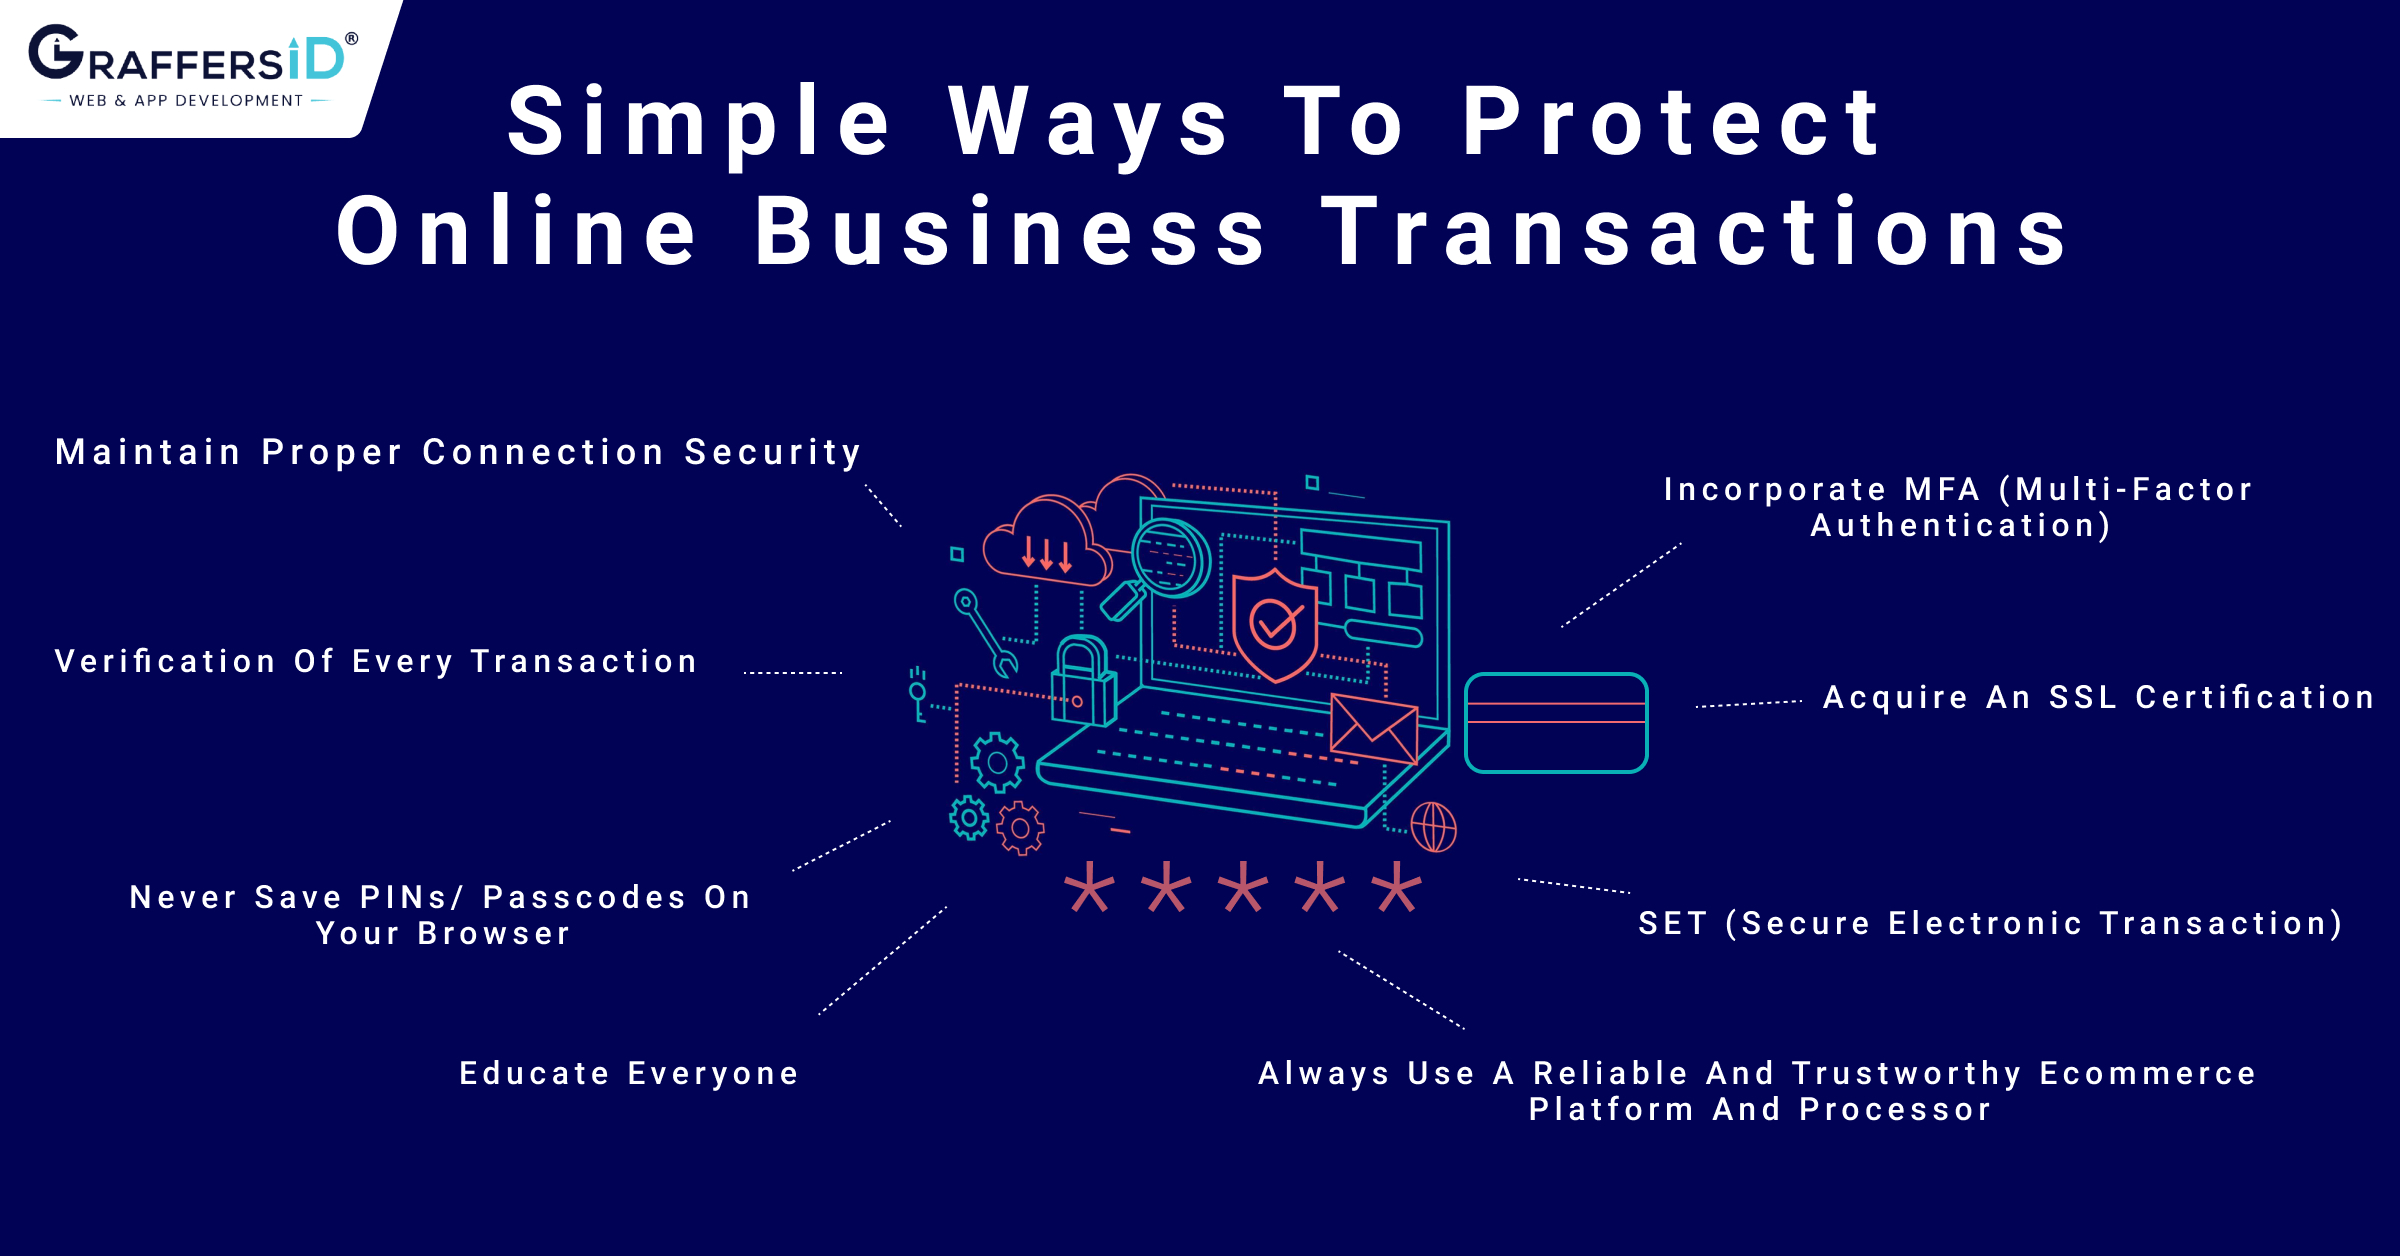 Simple ways to protect online business transactions